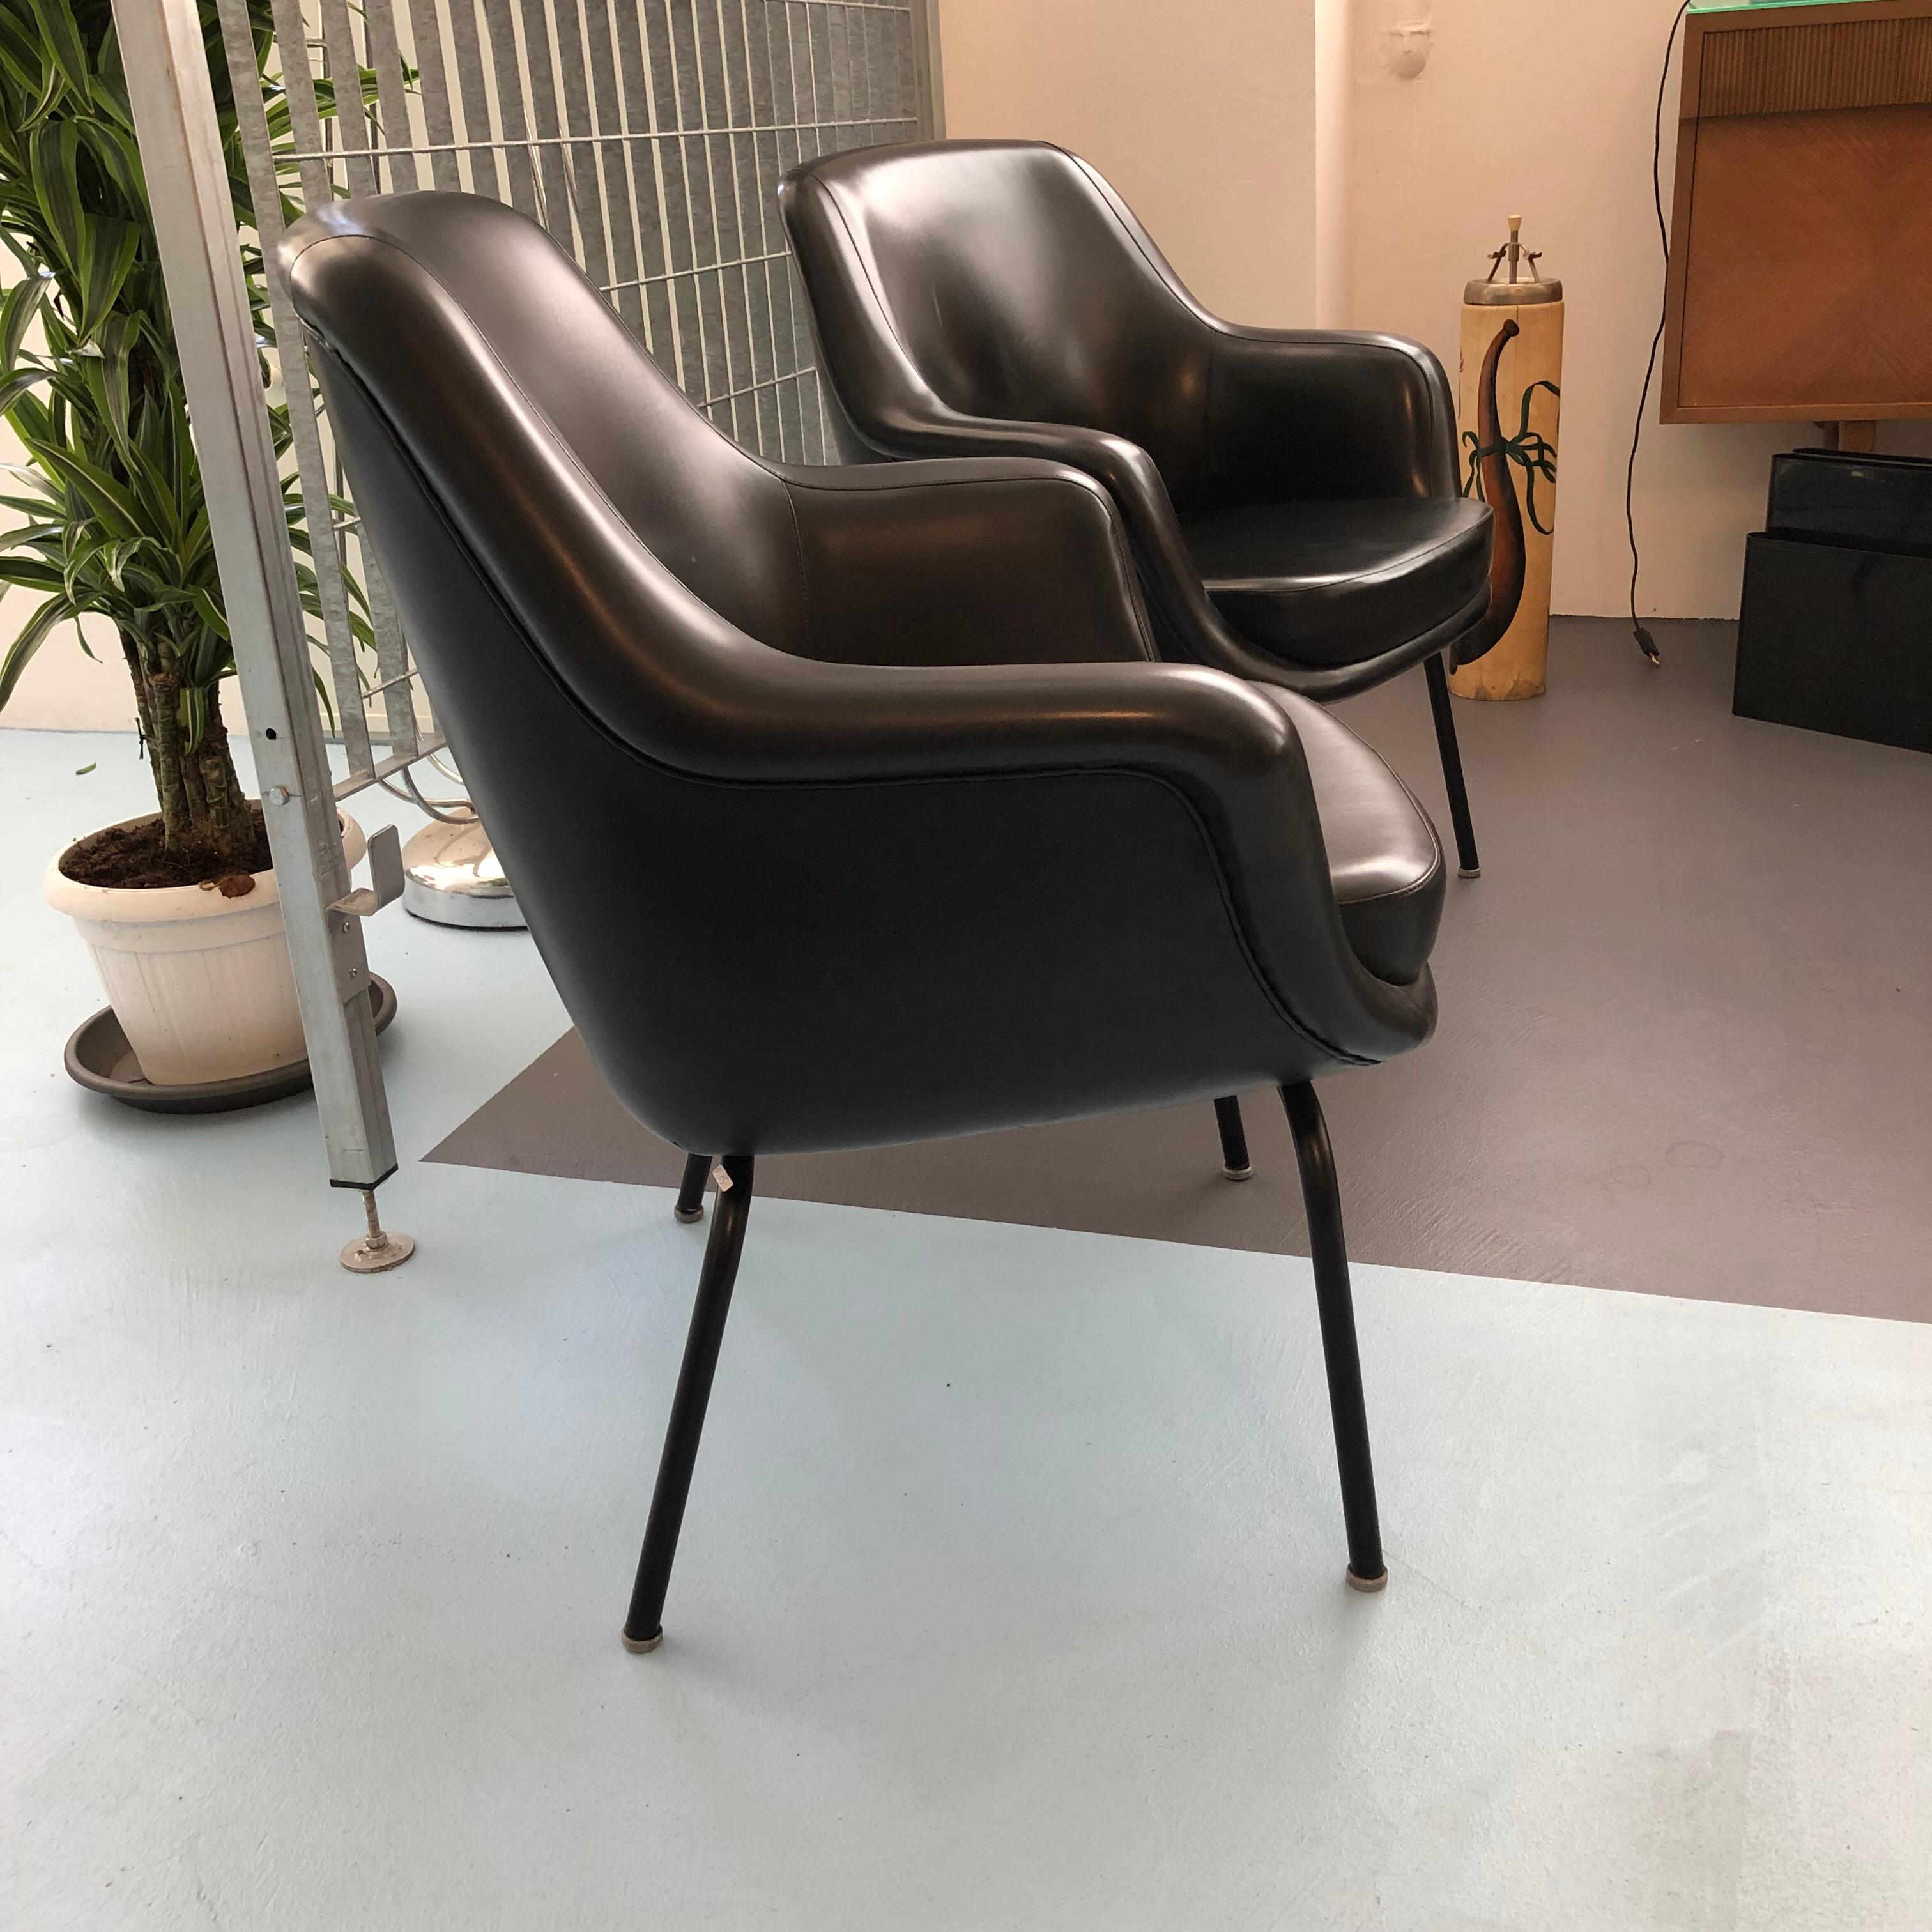 Pair of Olli Mannermaa Armchairs by Cassina, Italy, 1960s For Sale 3